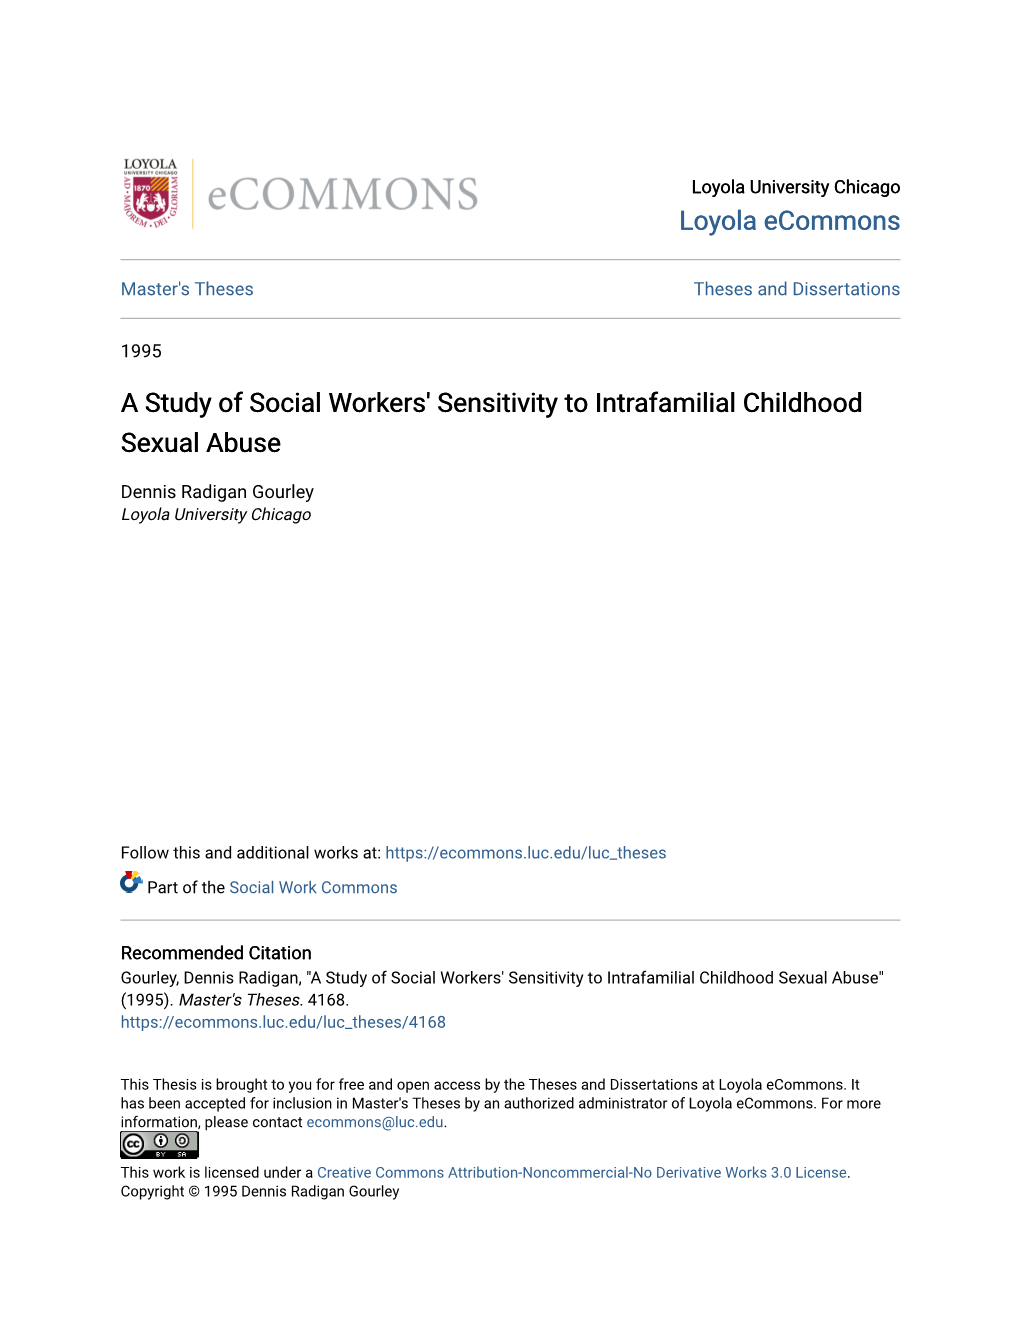 A Study of Social Workers' Sensitivity to Intrafamilial Childhood Sexual Abuse